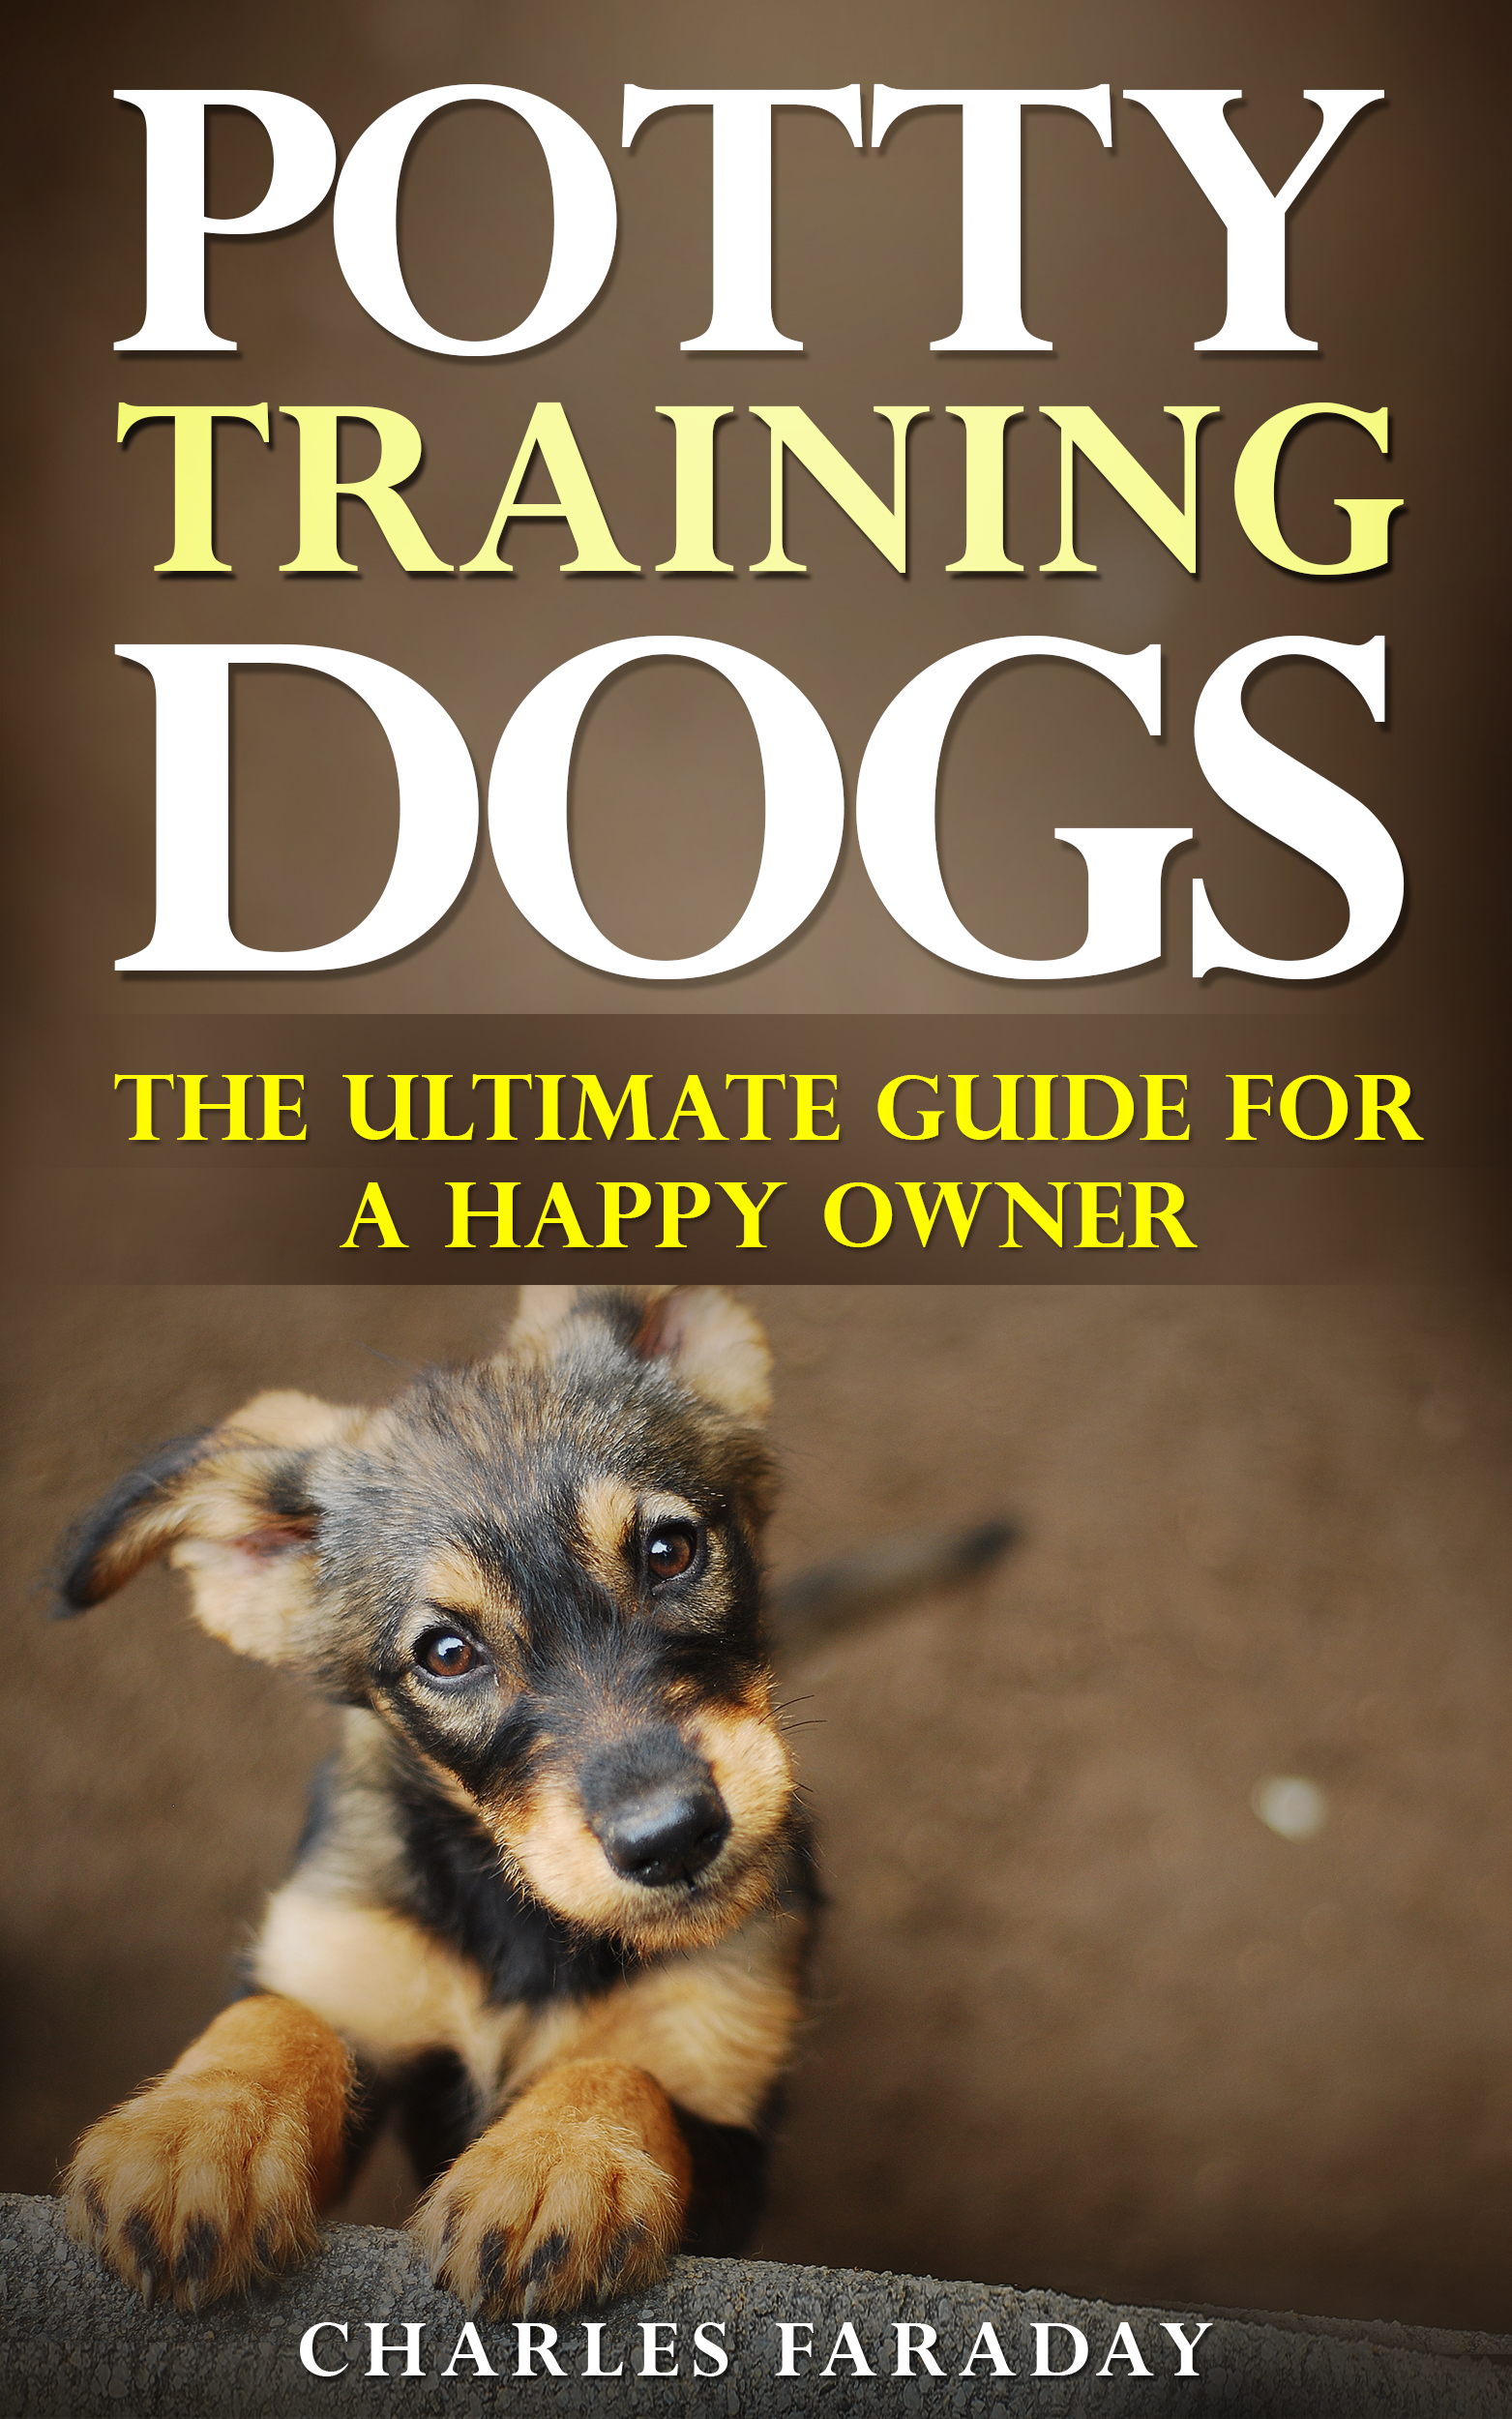 FREE: Potty Training Dogs: The Ultimate Guide For A Happy Owner by Charles Faraday